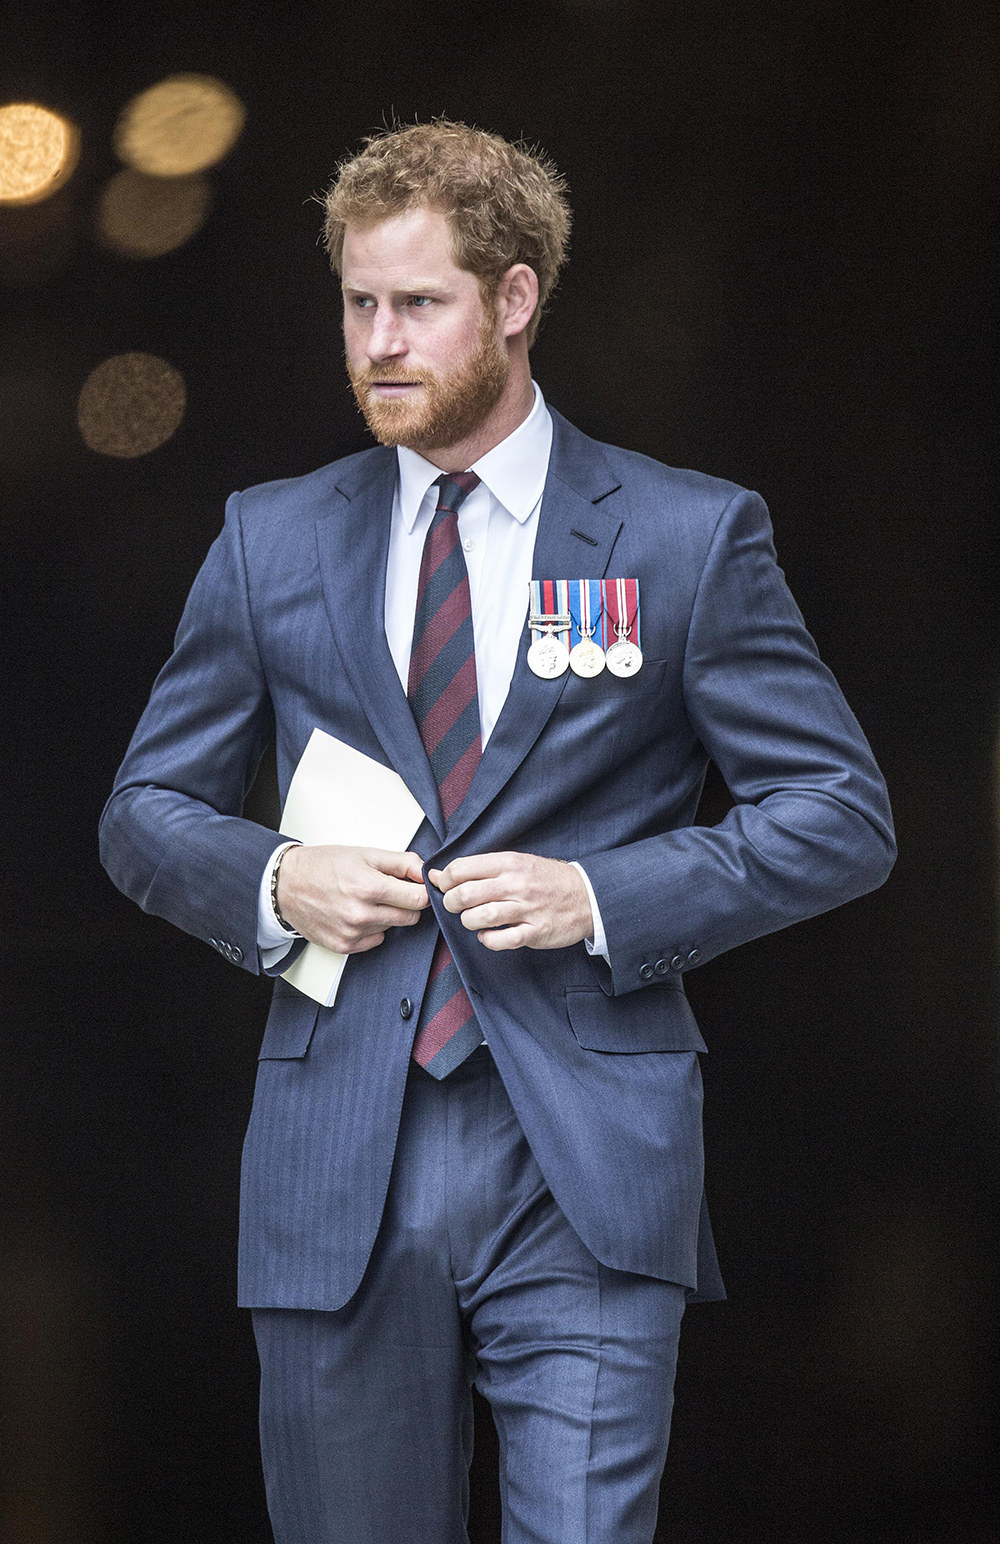 And Prince Harry's royal throne. 